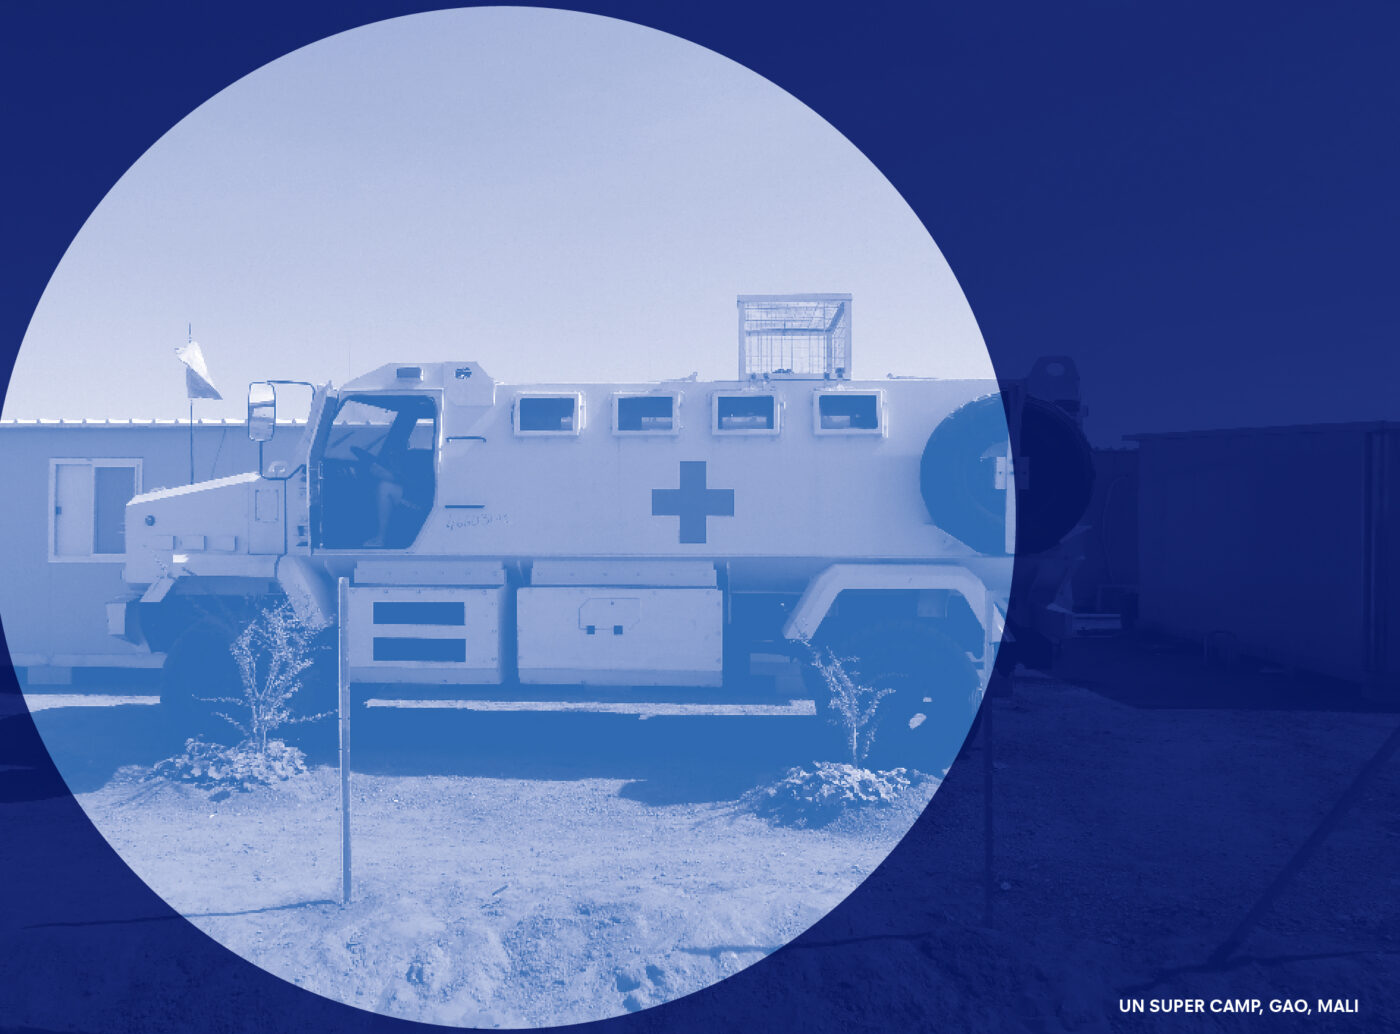 BLUE: The Architecture of UN Peacekeeping